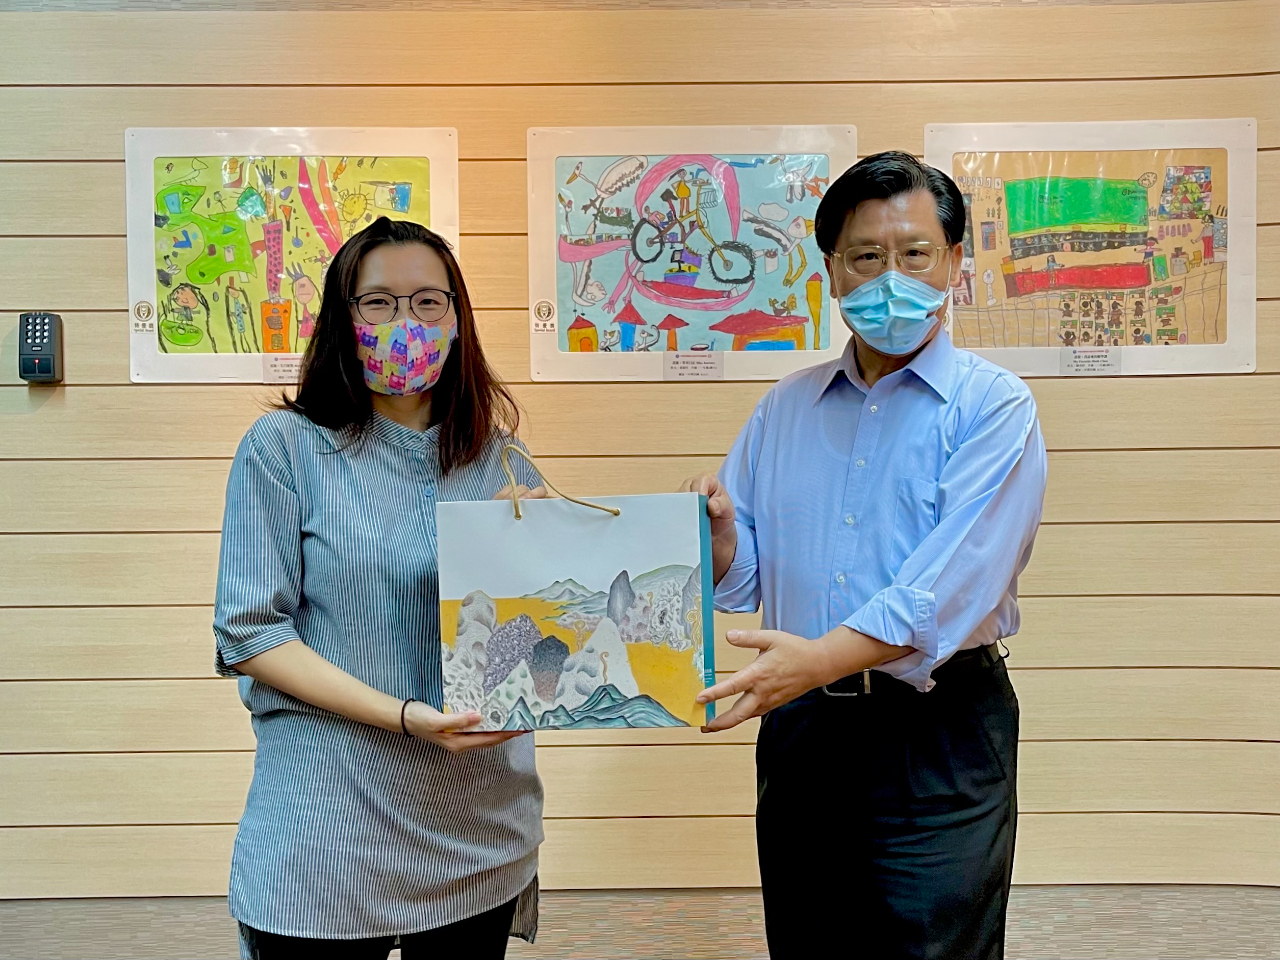 Representative Liang (left) is presenting a gift to thank the great effort done by Ms. Oscar Ng. (2022/06/22) 